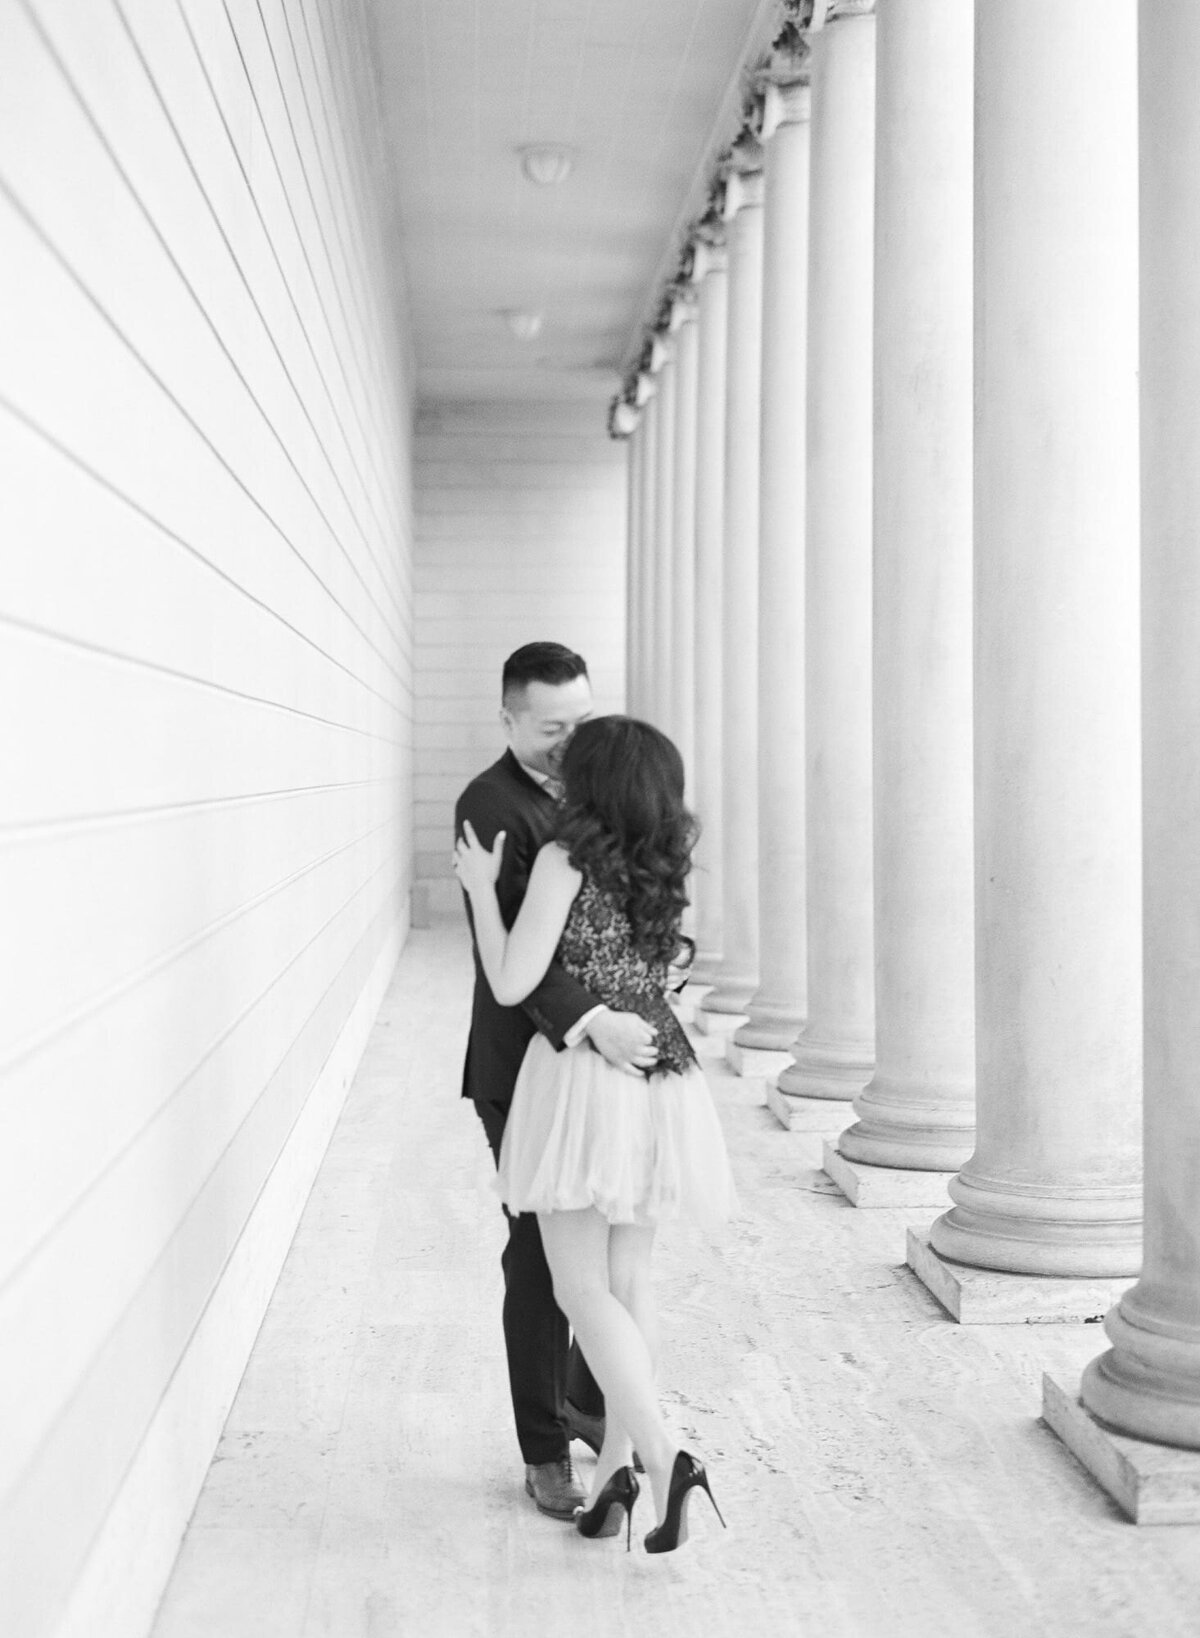 Grayscale engagement photography in San Francisco, California by Robin Jolin.